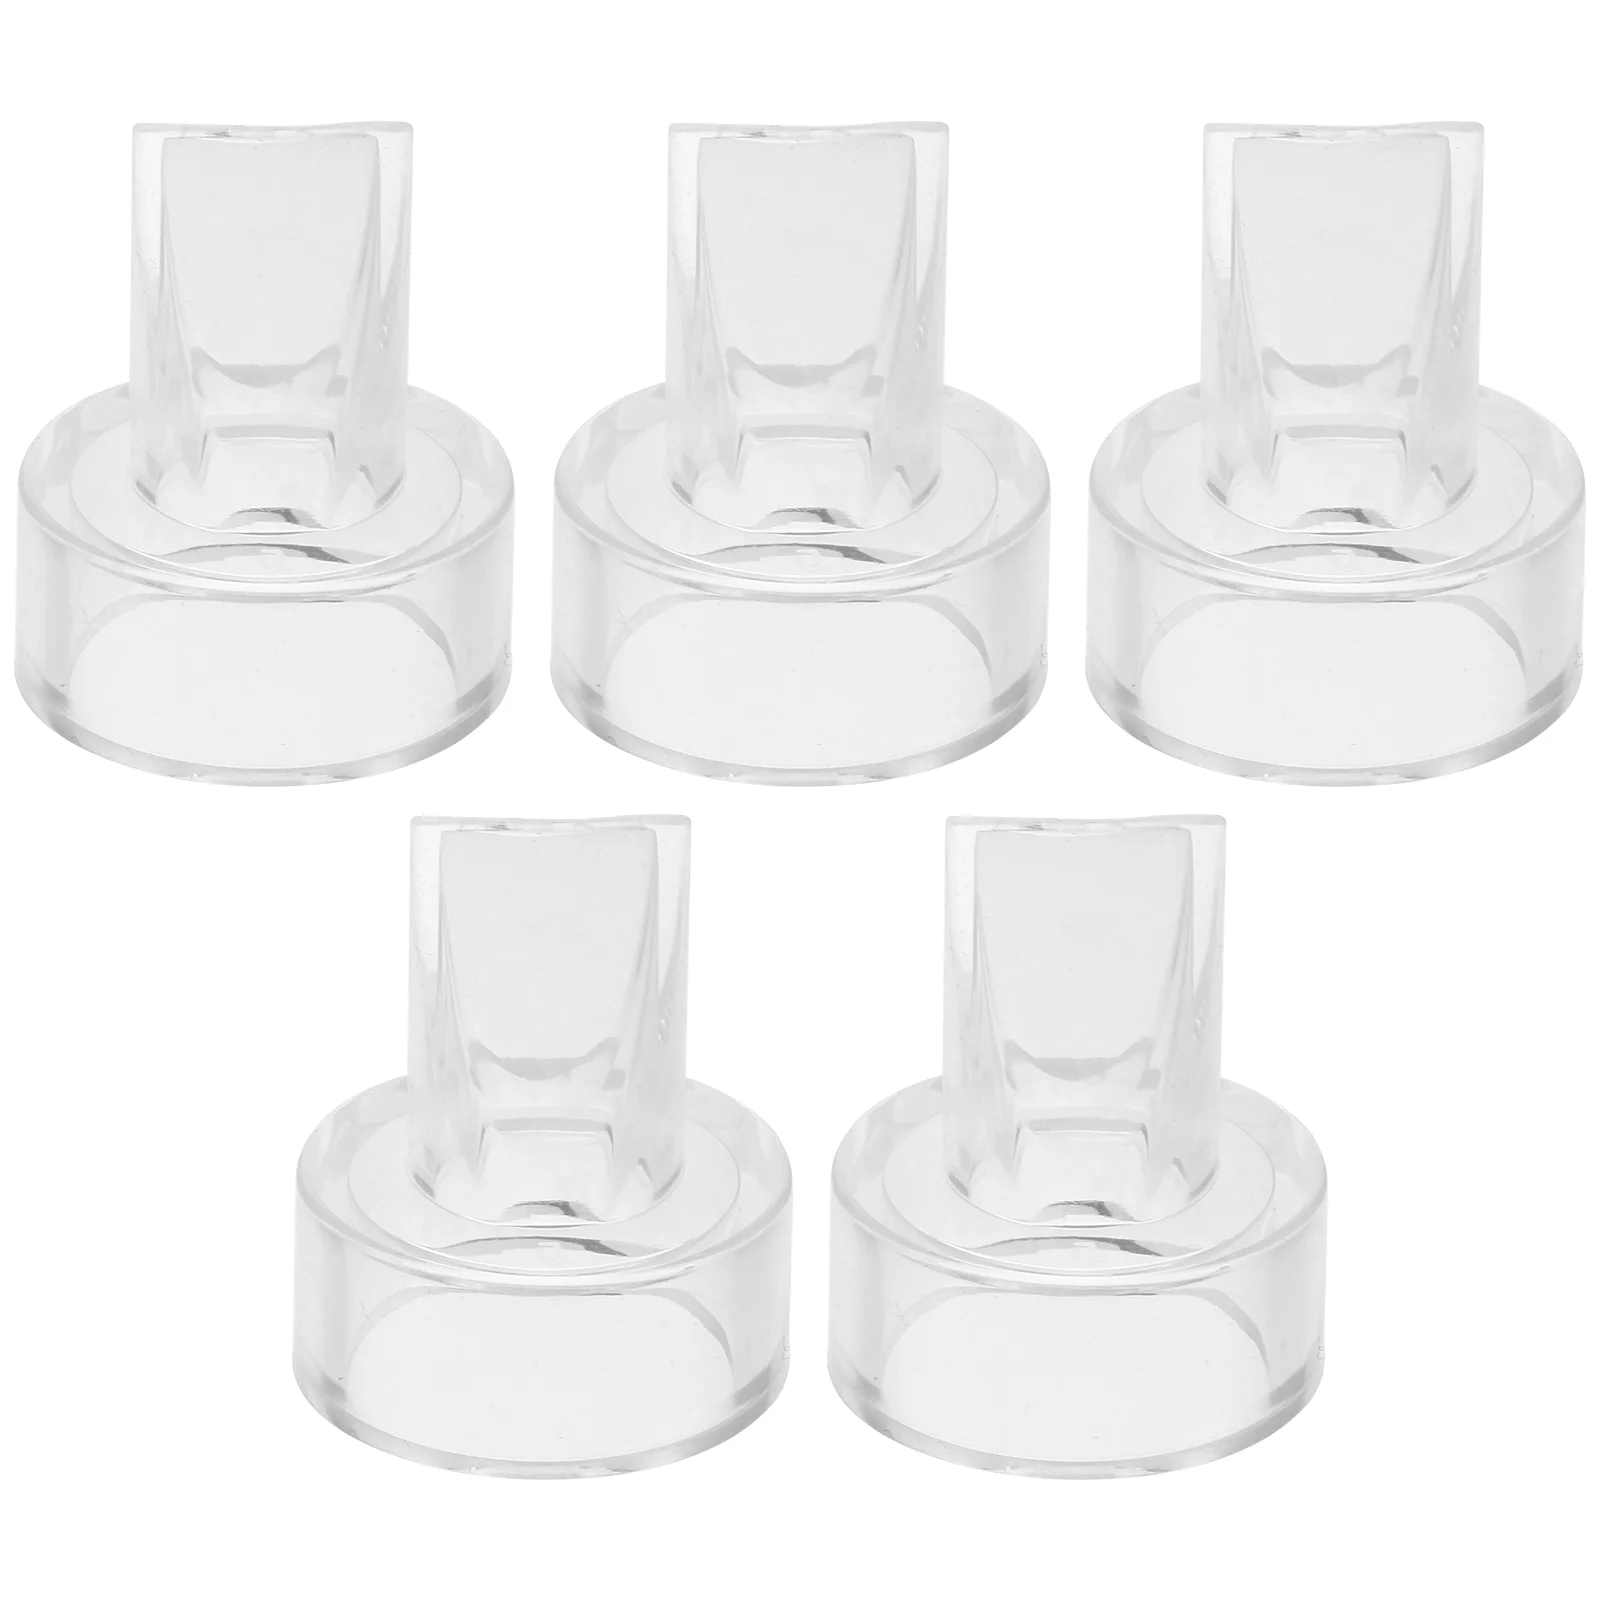 

5 Pcs High Heel Protectors Duckbill Valve Electric Breast Pump Accessories Anti Backflow Valves Manual Parts Silica Silicone